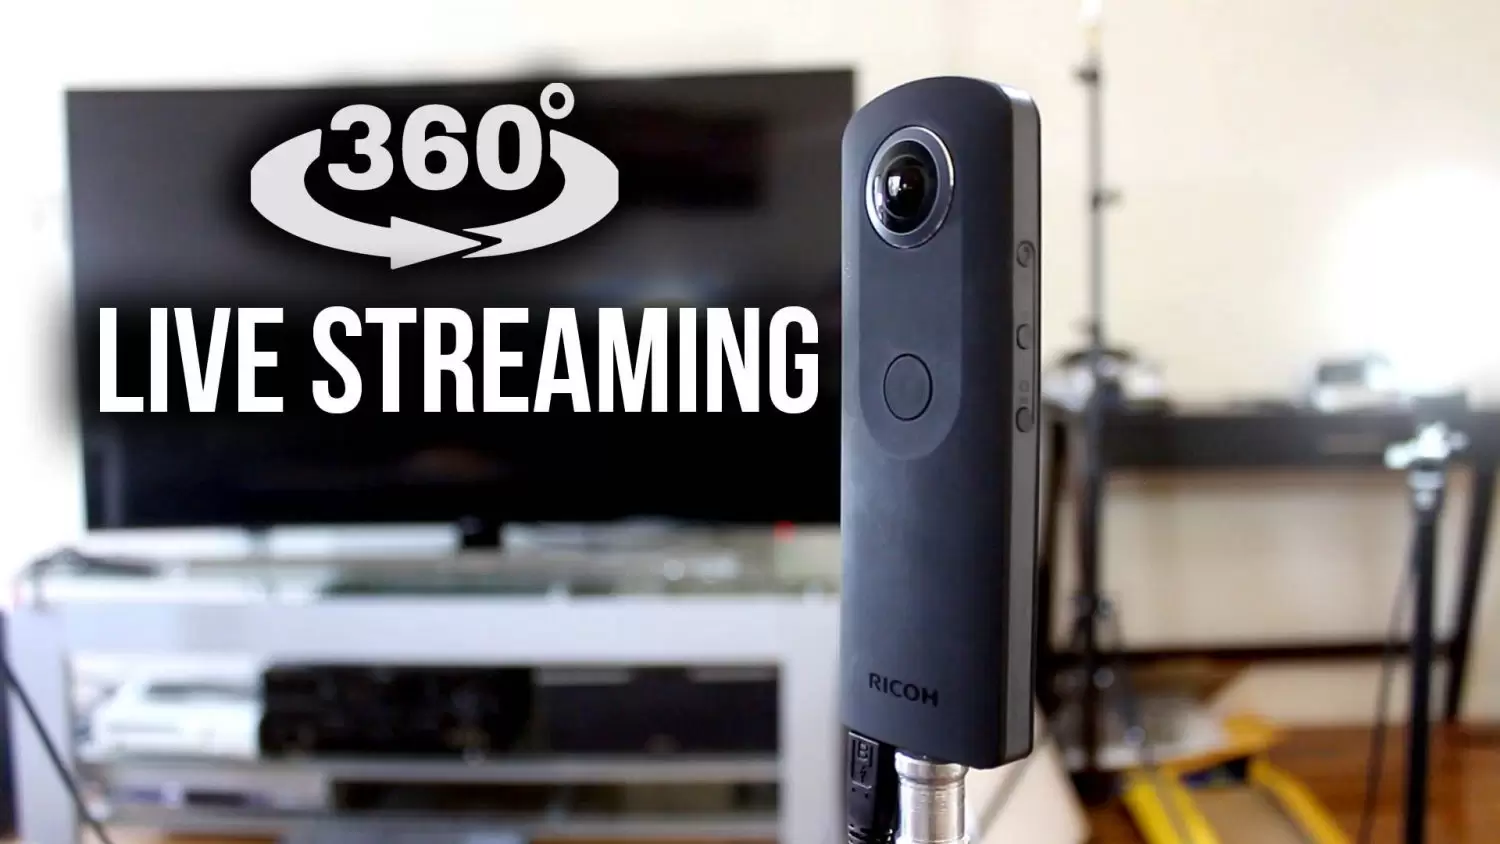 360 live streaming